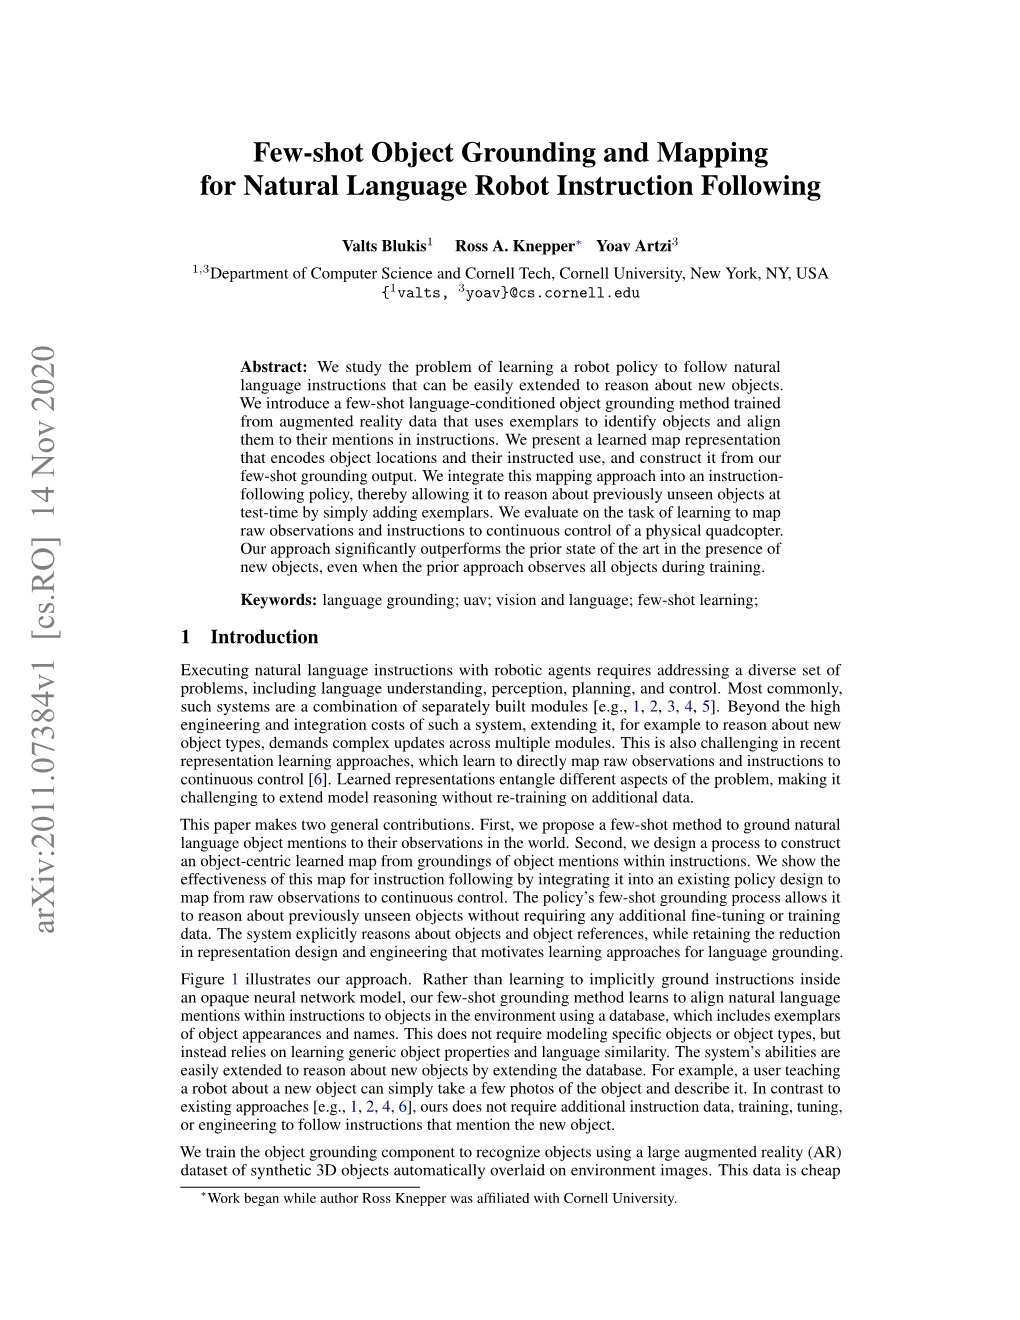 Few-Shot Object Grounding and Mapping for Natural Language Robot Instruction Following